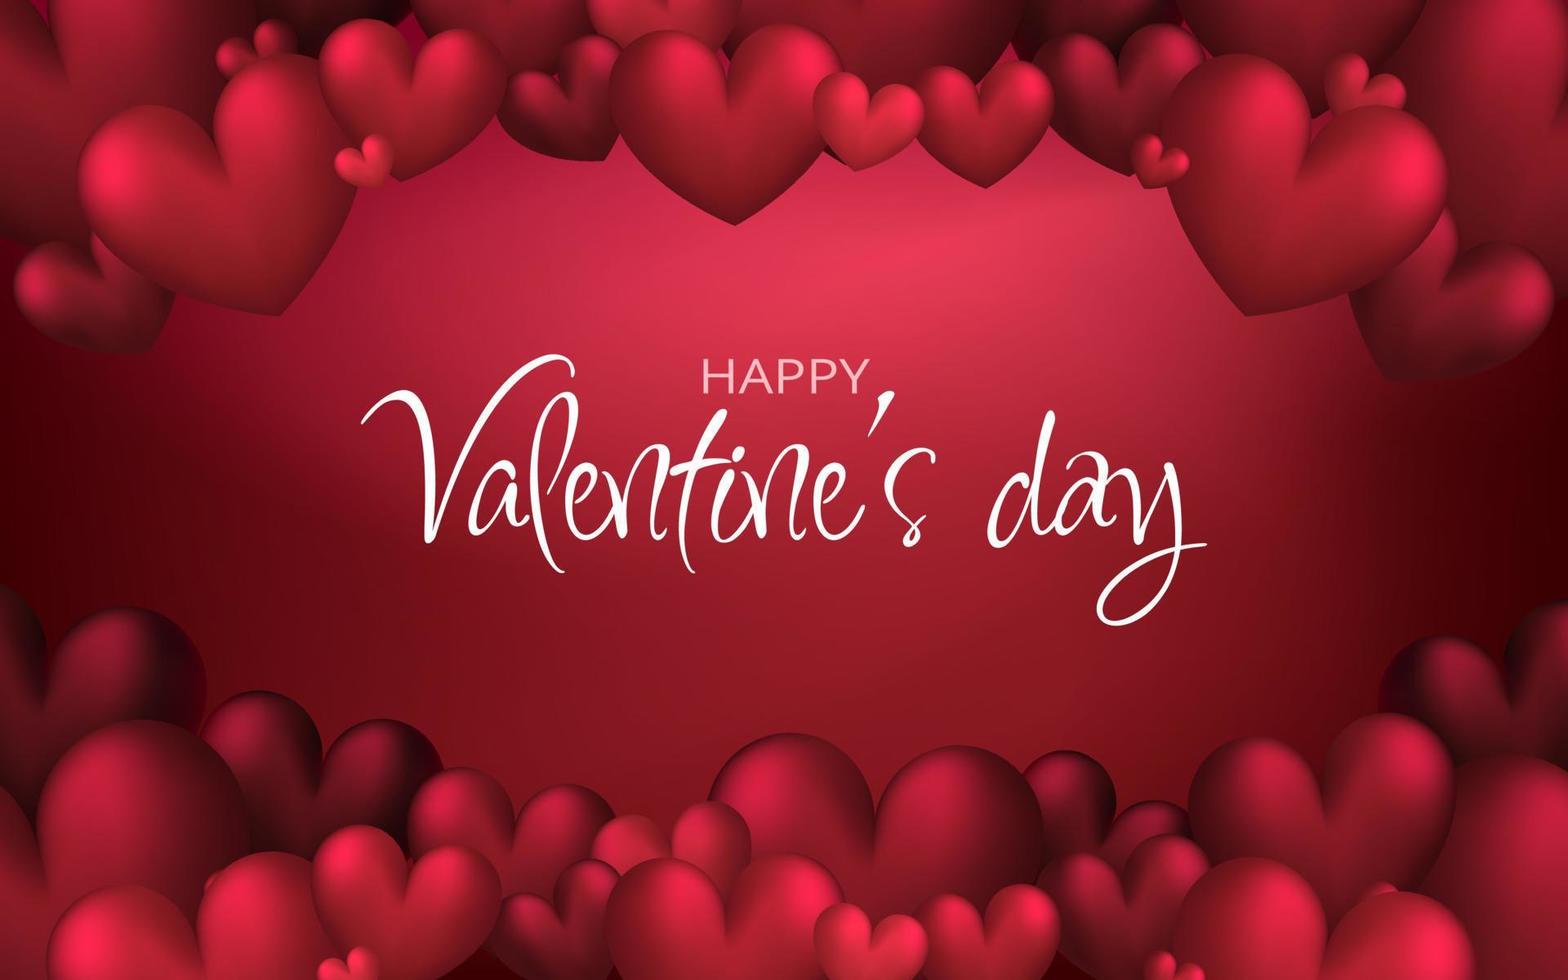 Valentines day sale red romantic background with 3d balloon hearts, template. Realistic 3d design. Vector illustration. For wallpaper, flyer, invitation, poster, brochure, banner.